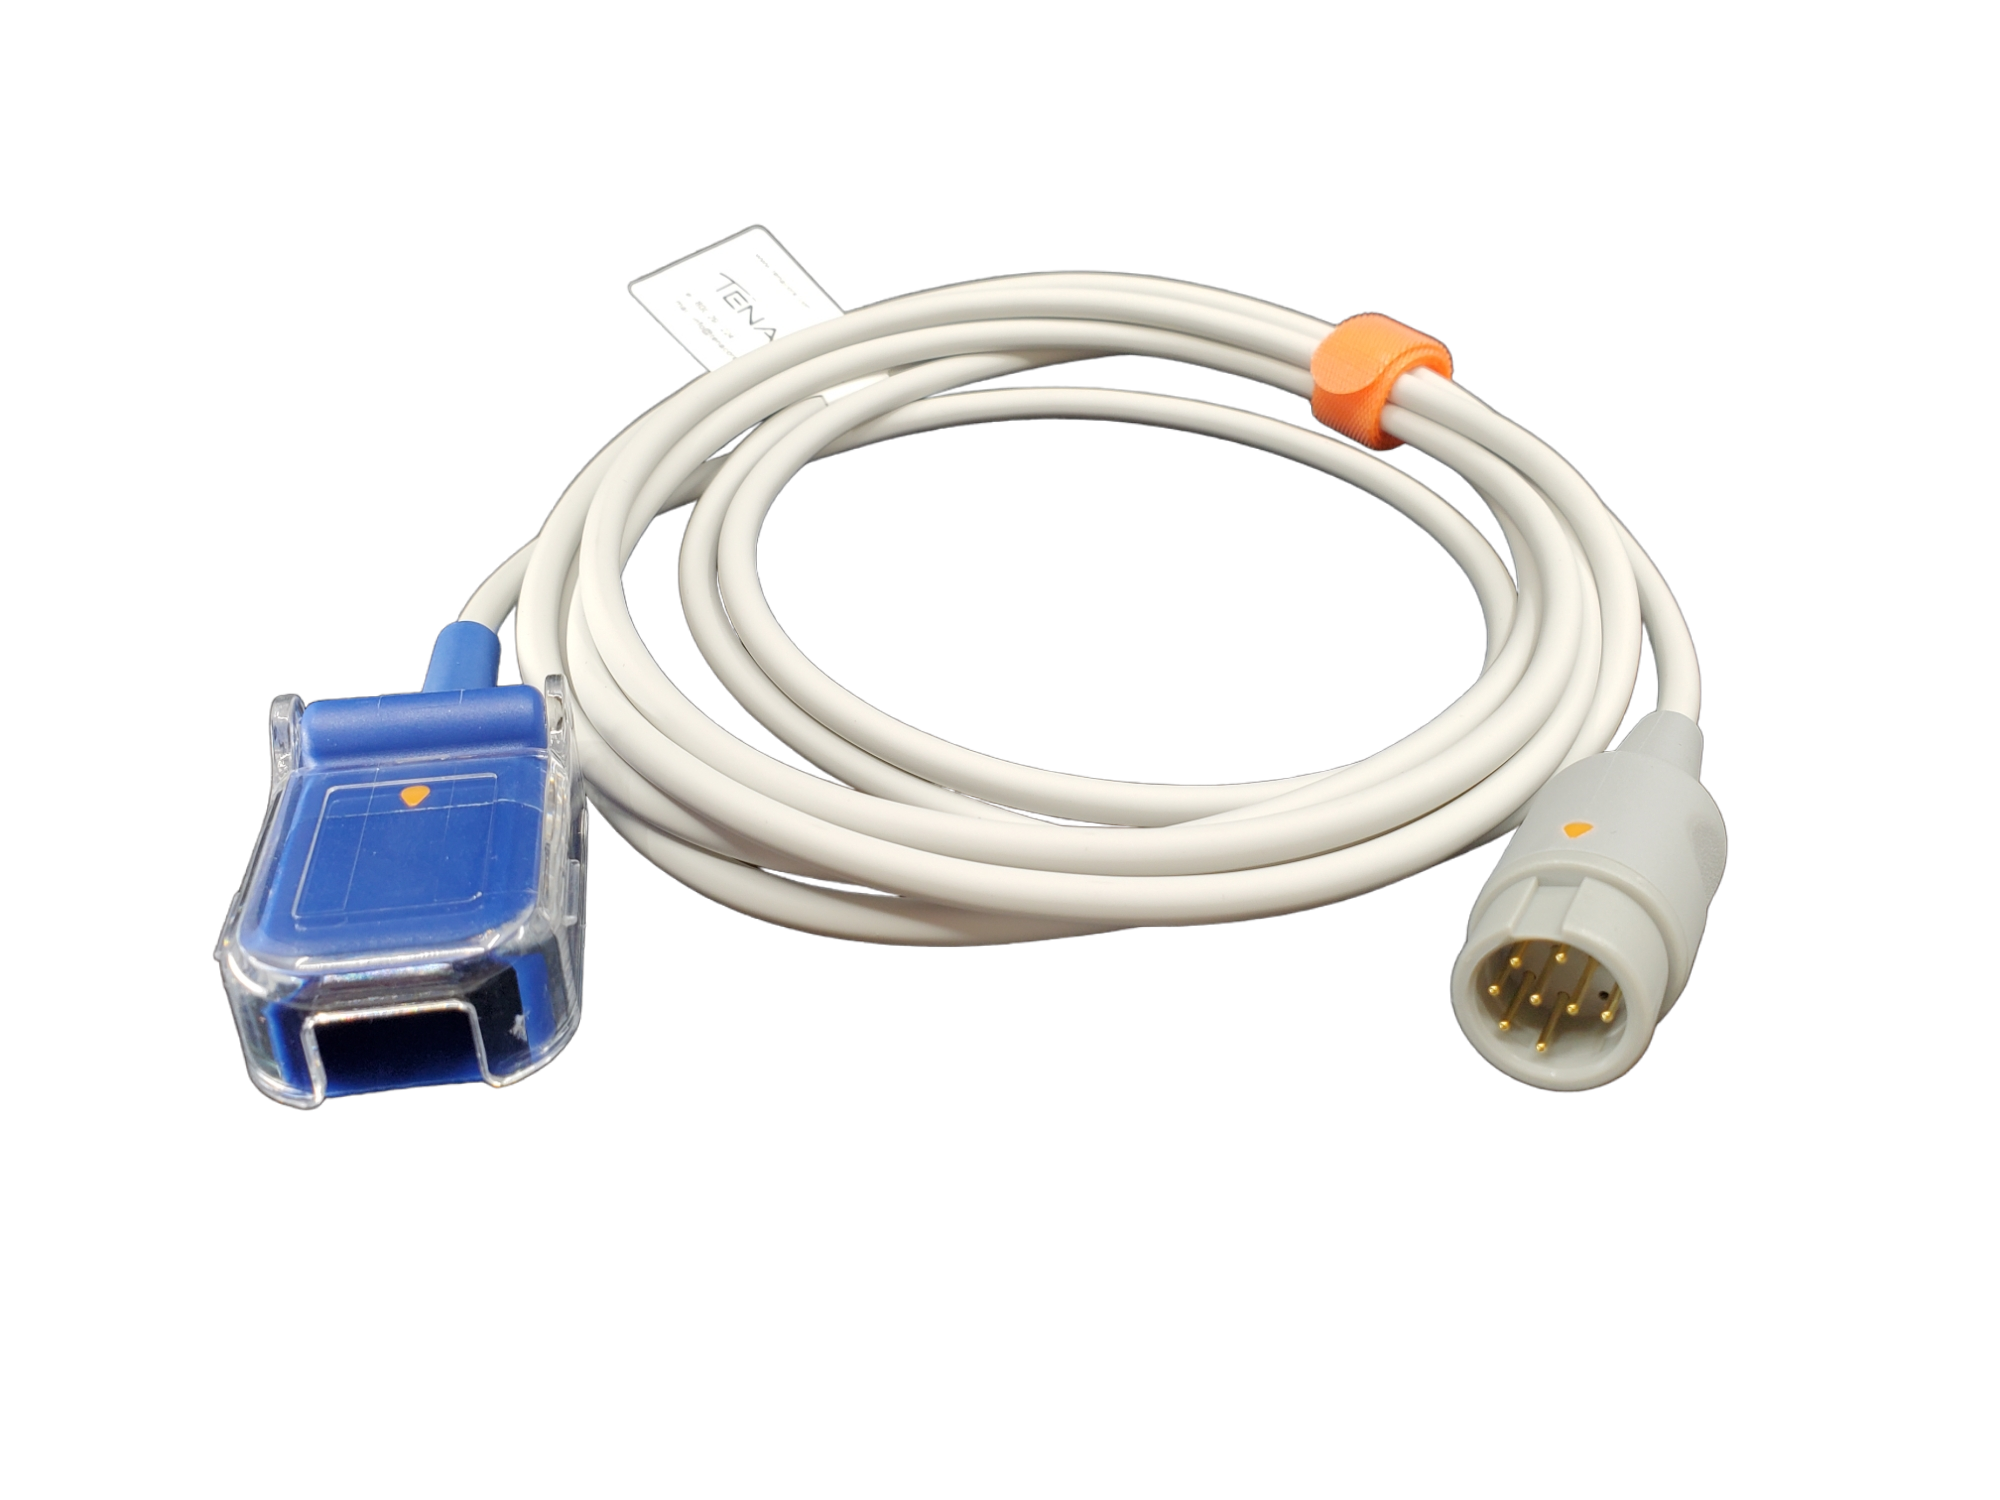 Mindray SpO2 Adaptor Cable Replacement: 3.0m, use with Nellcor-Oximax sensor